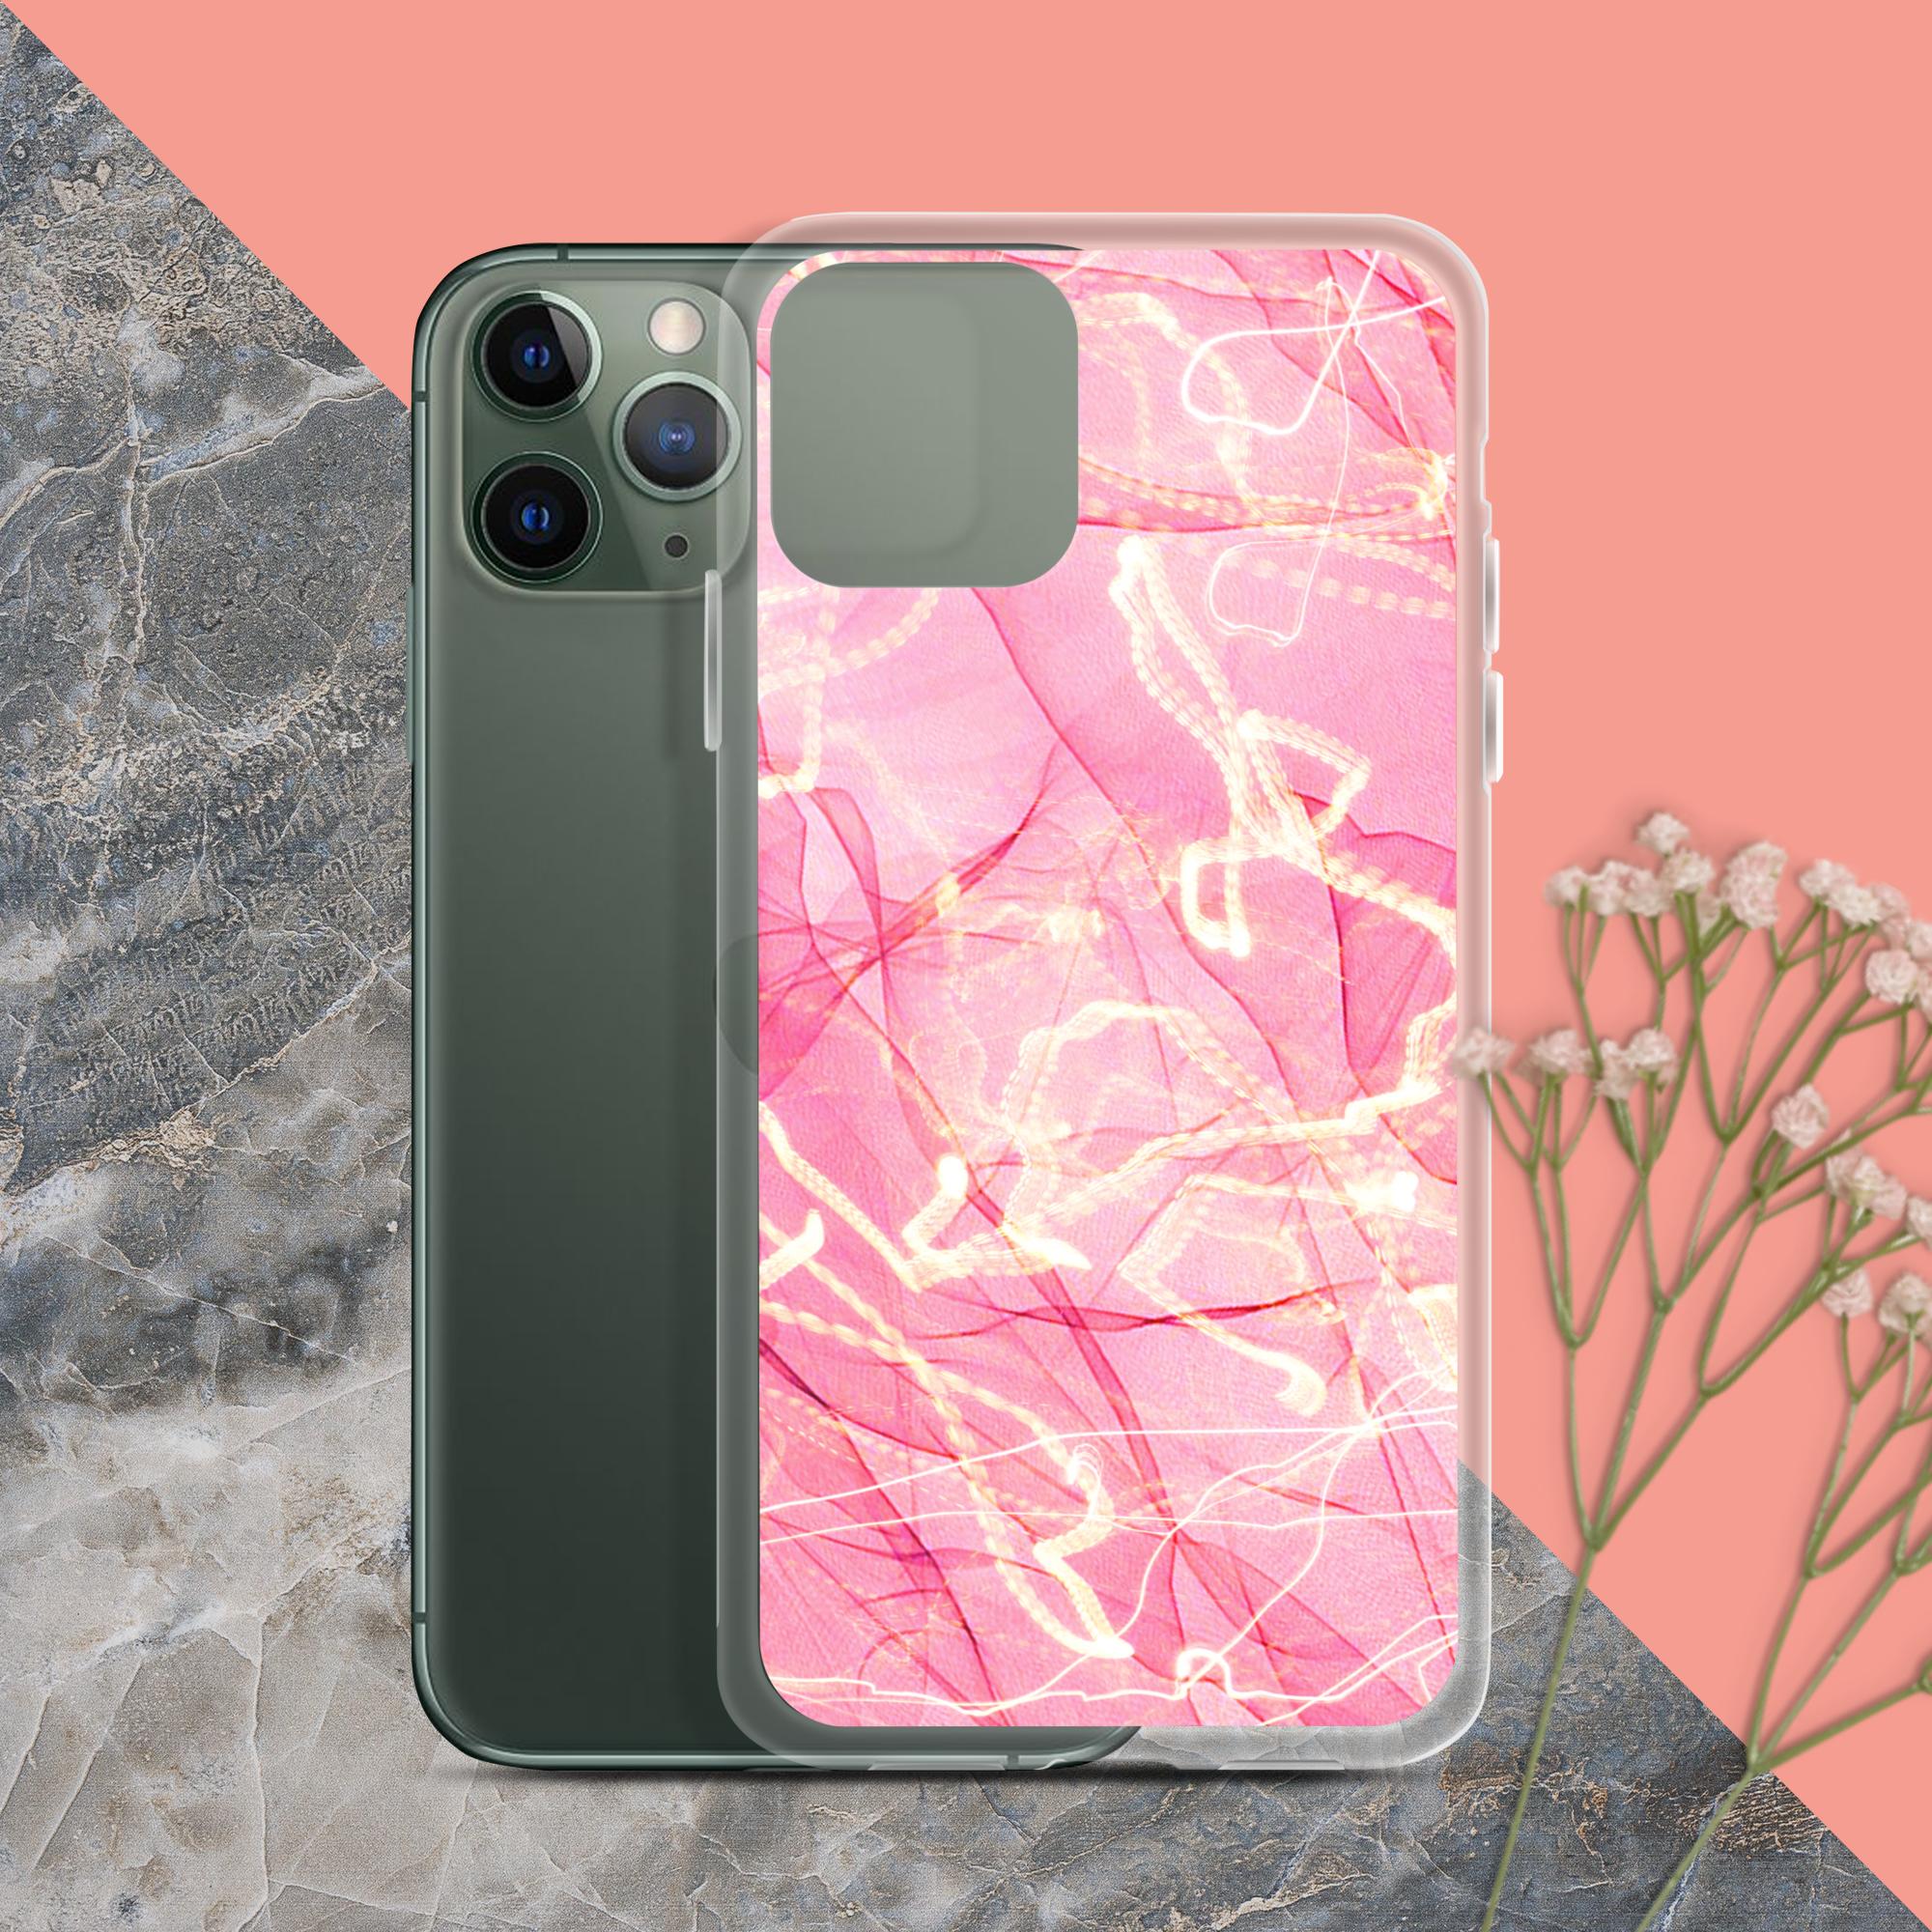 Clear Case for iPhone® customized iPhone Case